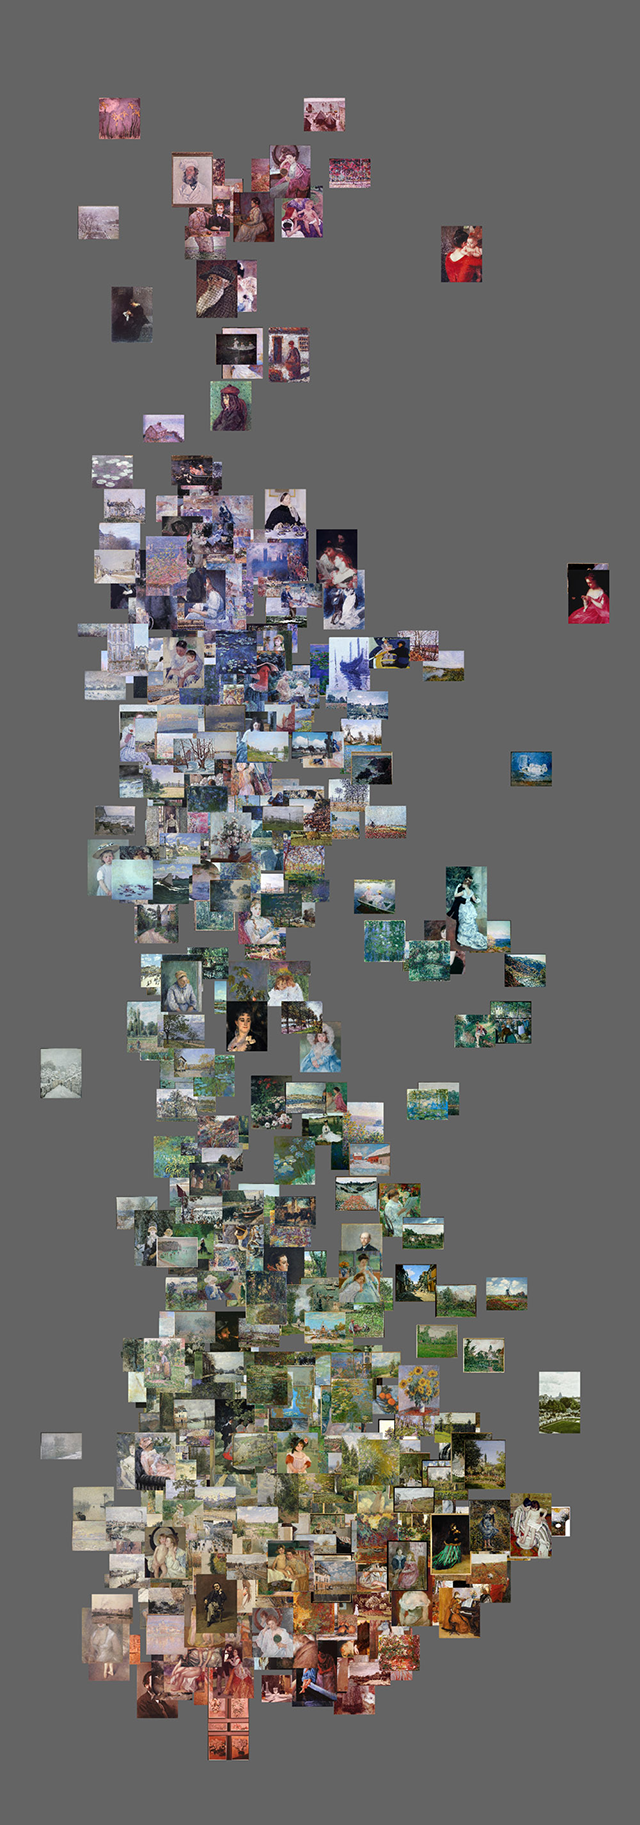 1226 Impressionist paintings (x - saturation, y - hue) w640